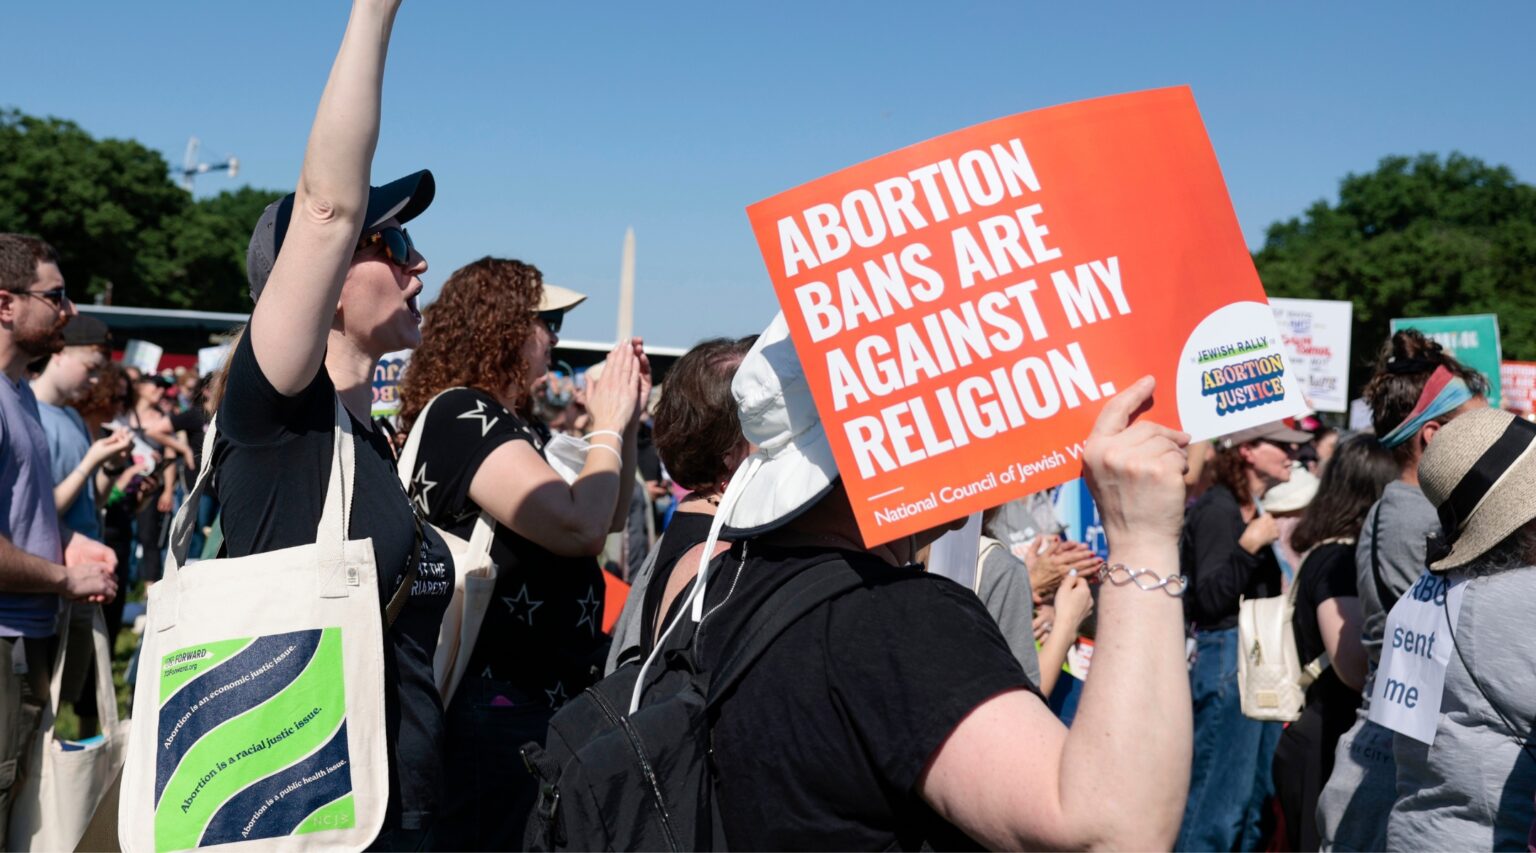 6-27-23-Abortion-Bans-Are-Against-My-Religion-1536x853 image